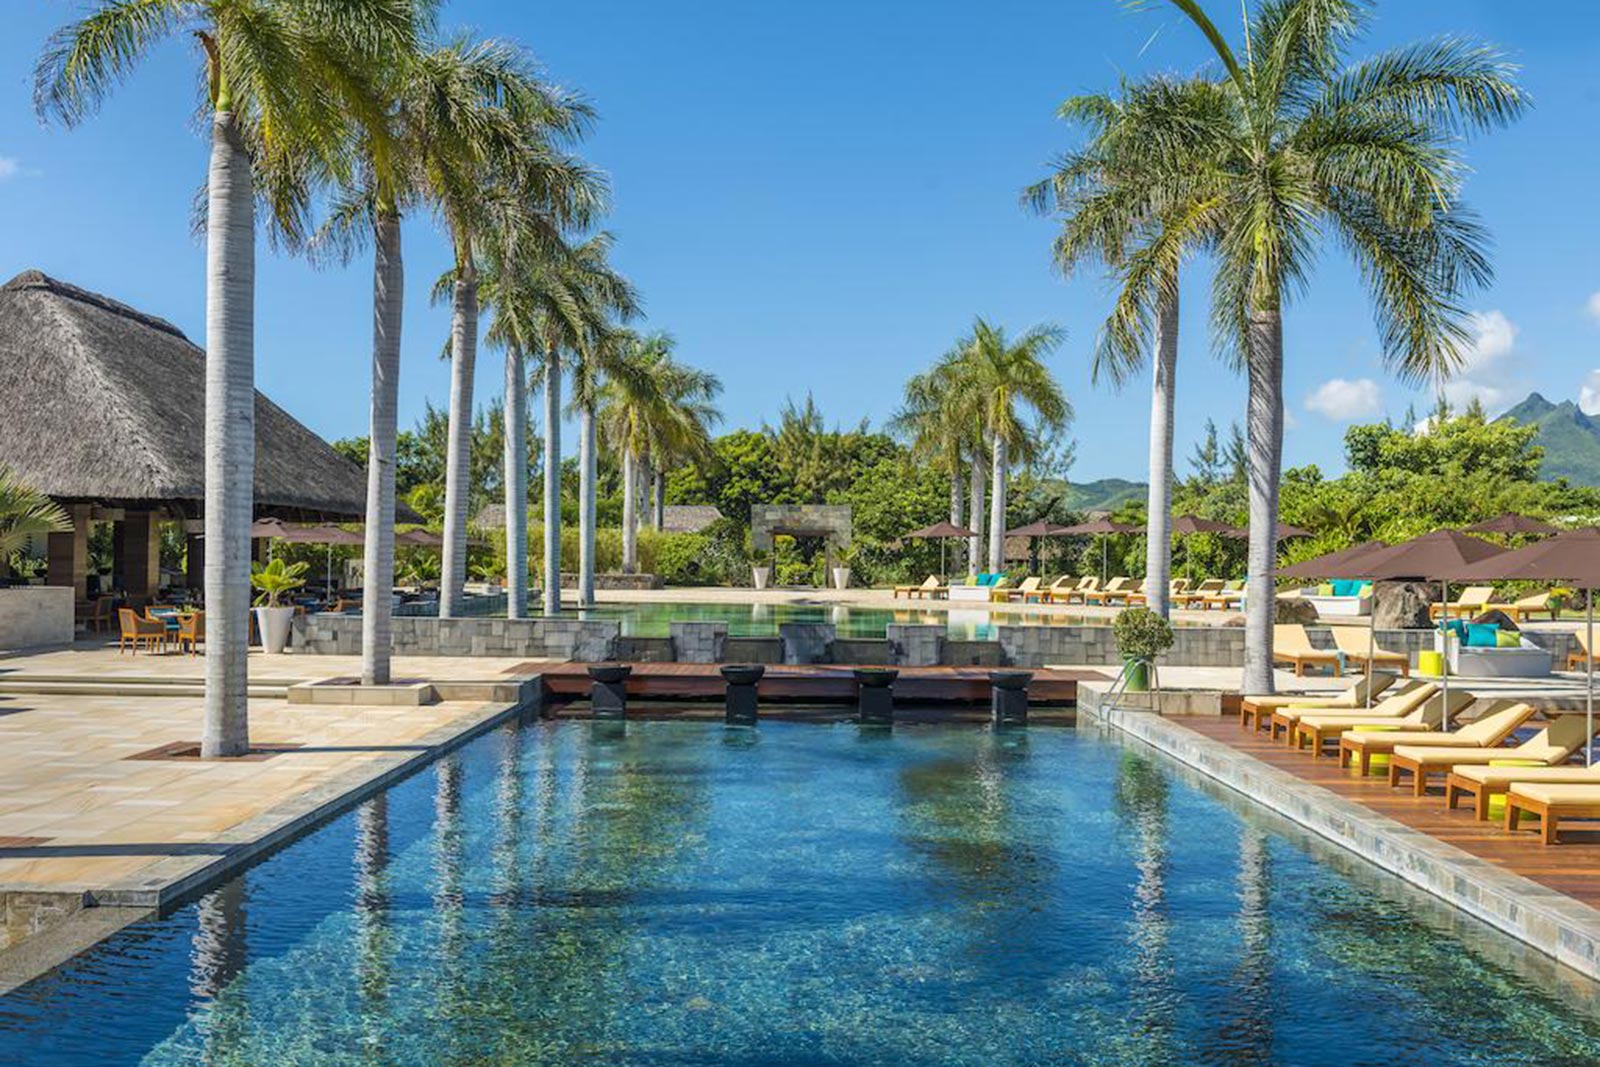 Pool with coconut trees in a resort in Mauritius. Where to stay in Mauritius, the best resort in Mauritius